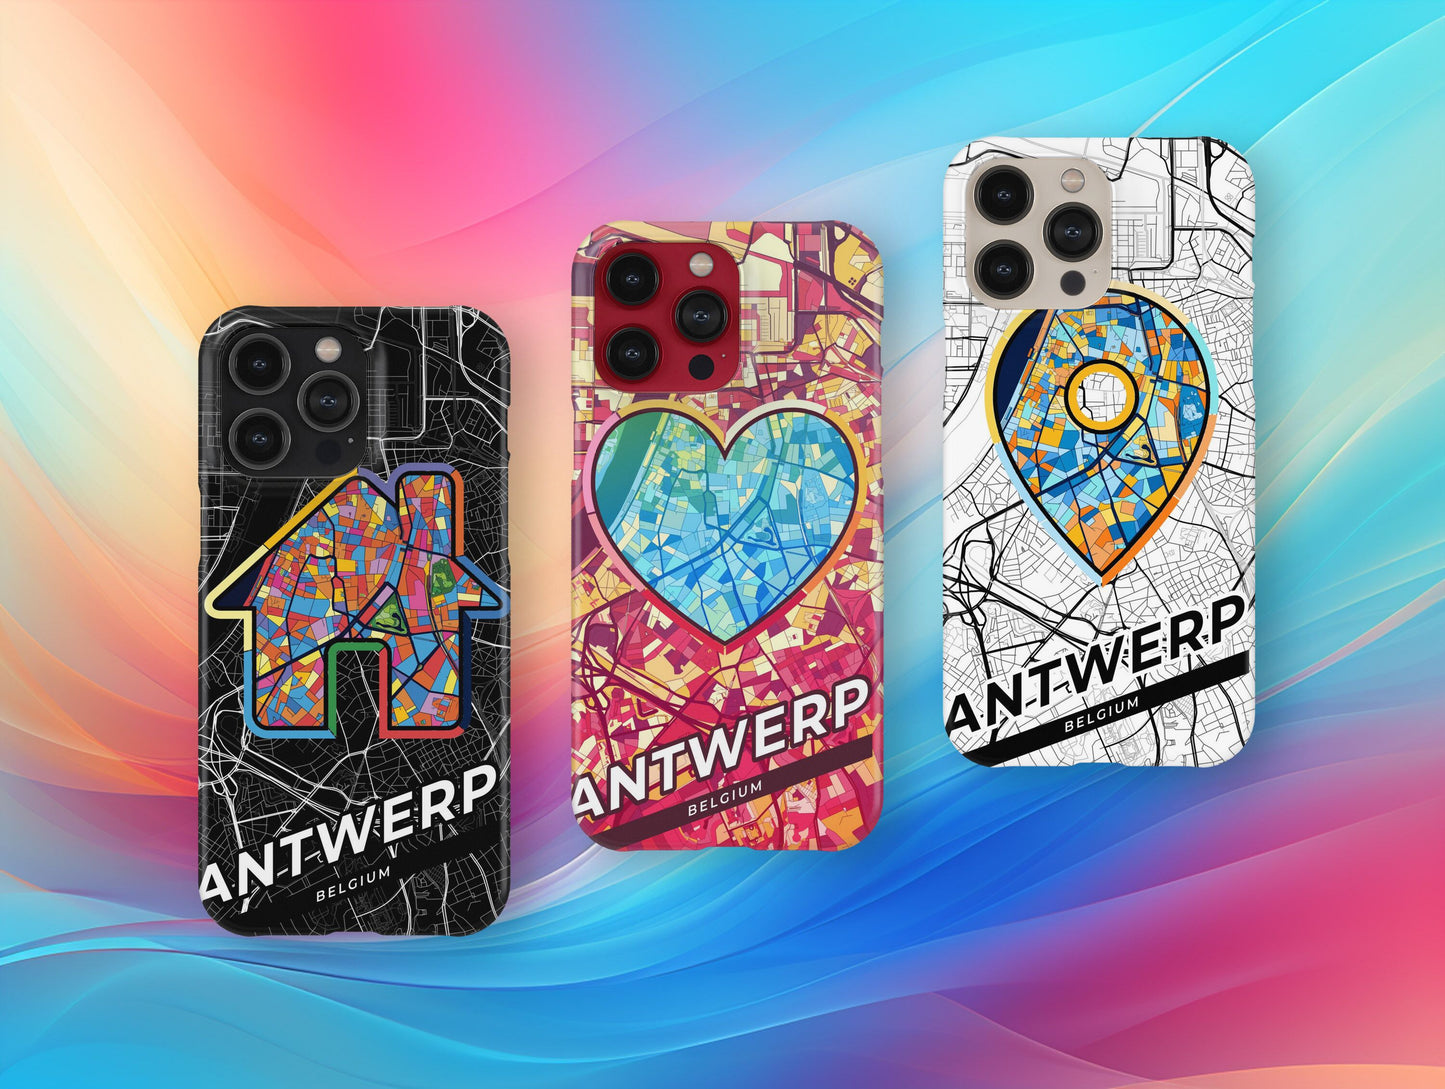 Antwerp Belgium slim phone case with colorful icon. Birthday, wedding or housewarming gift. Couple match cases.